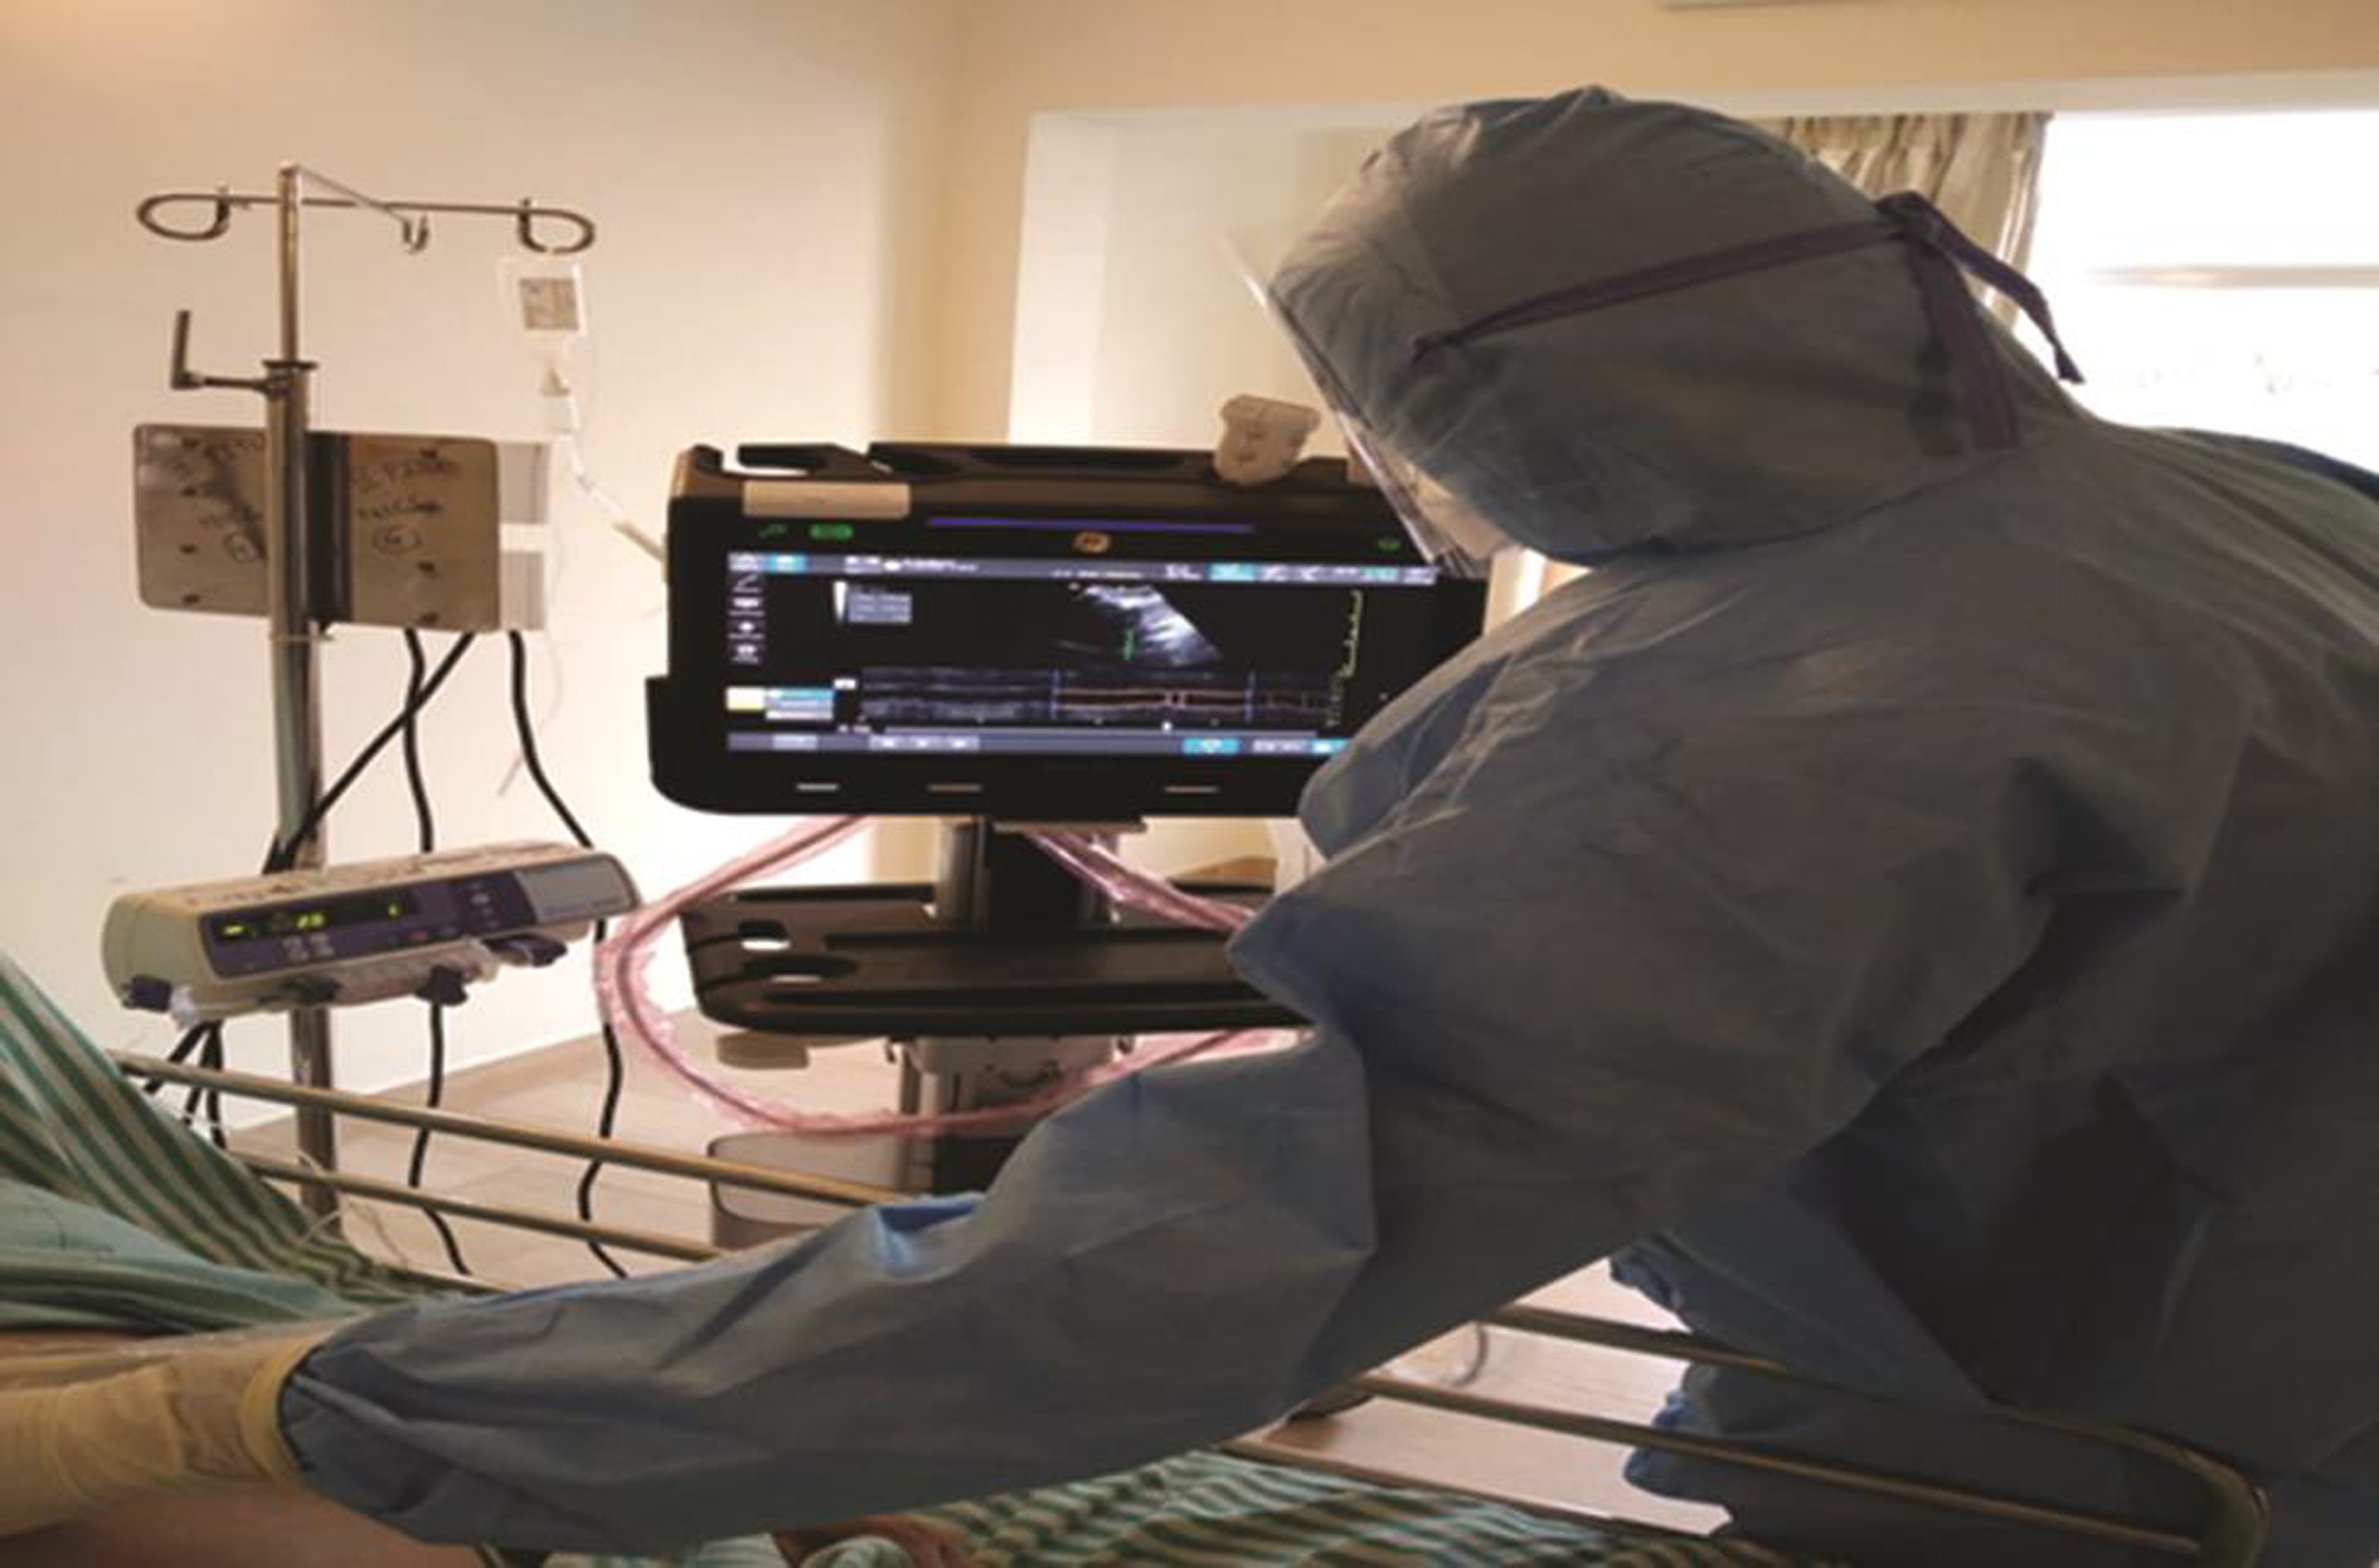 Point-of-care ultrasound using ultrasound machine with artificial intelligence in a coronavirus disease 2019 suspected patient while waiting for results of reverse transcriptase polymerase chain reaction testing.